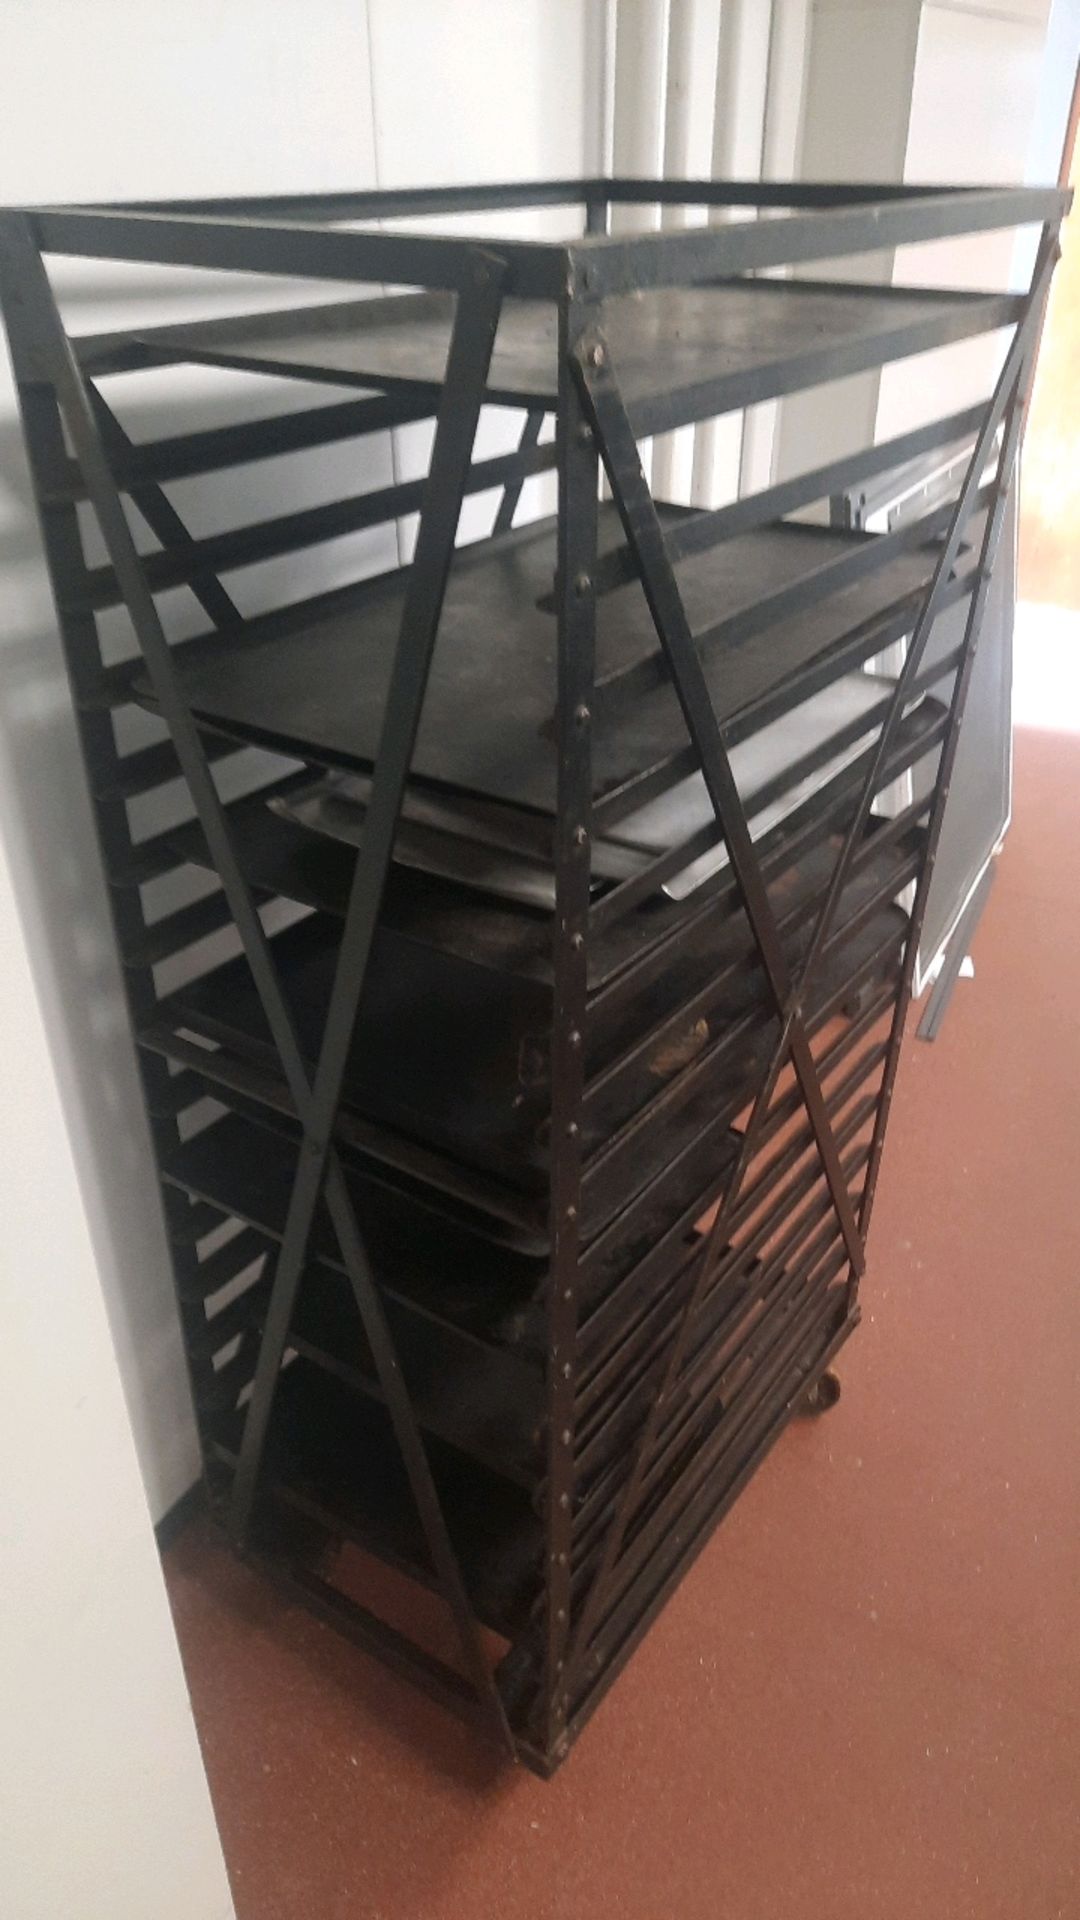 Bakery Tray Rack Trolley - Image 3 of 4